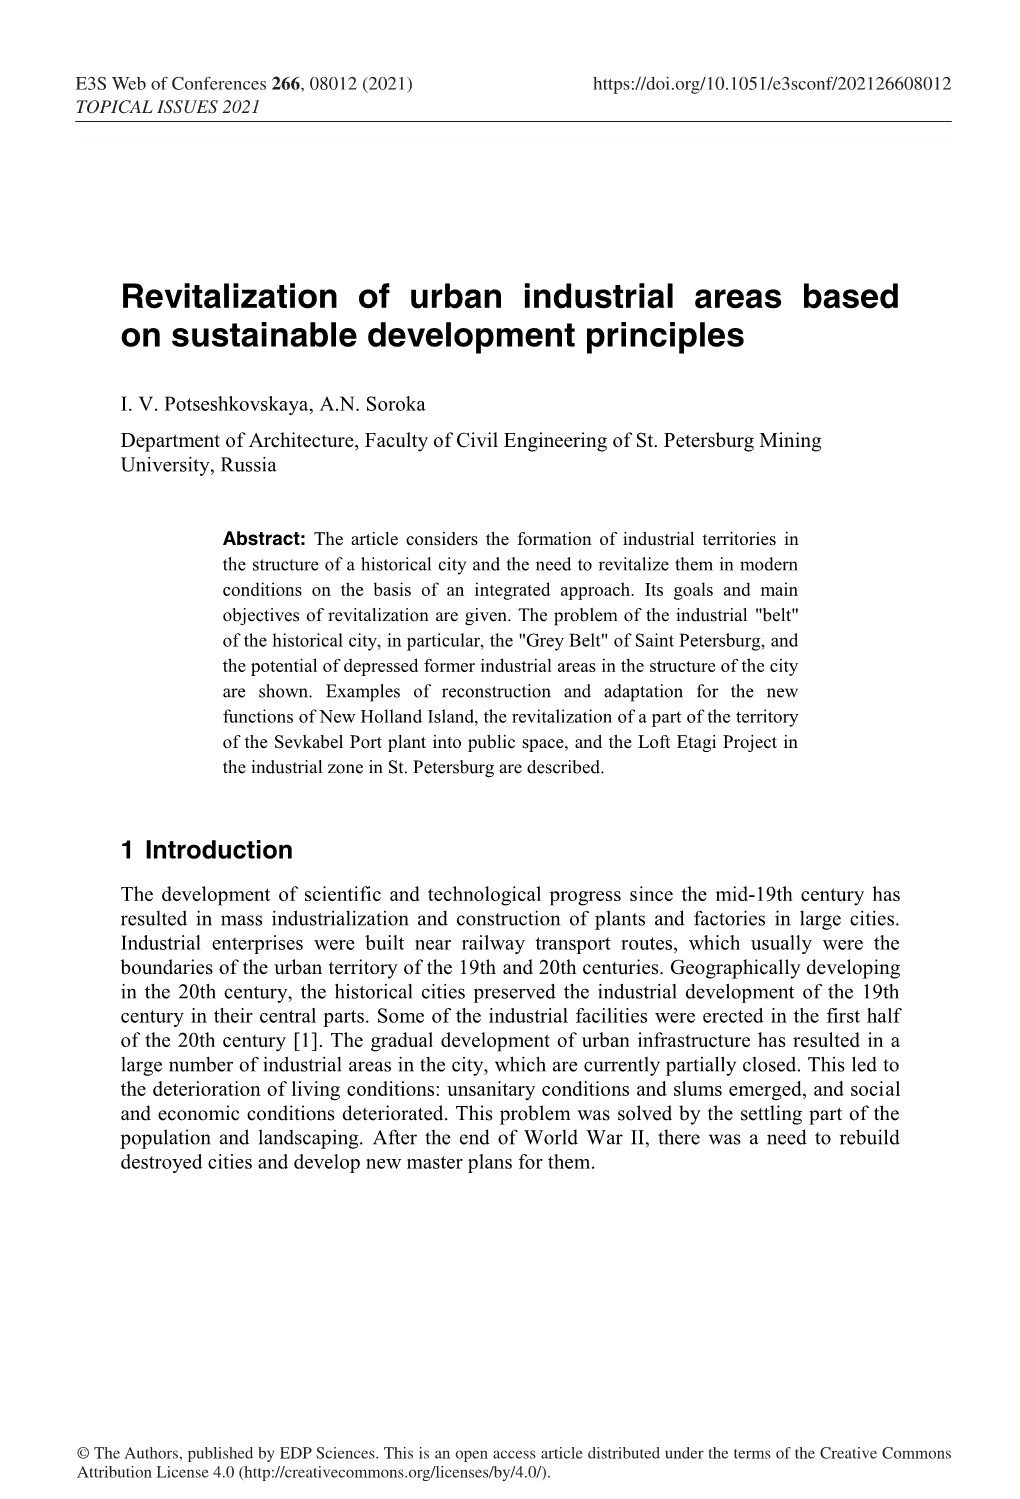 Revitalization of Urban Industrial Areas Based on Sustainable Development Principles